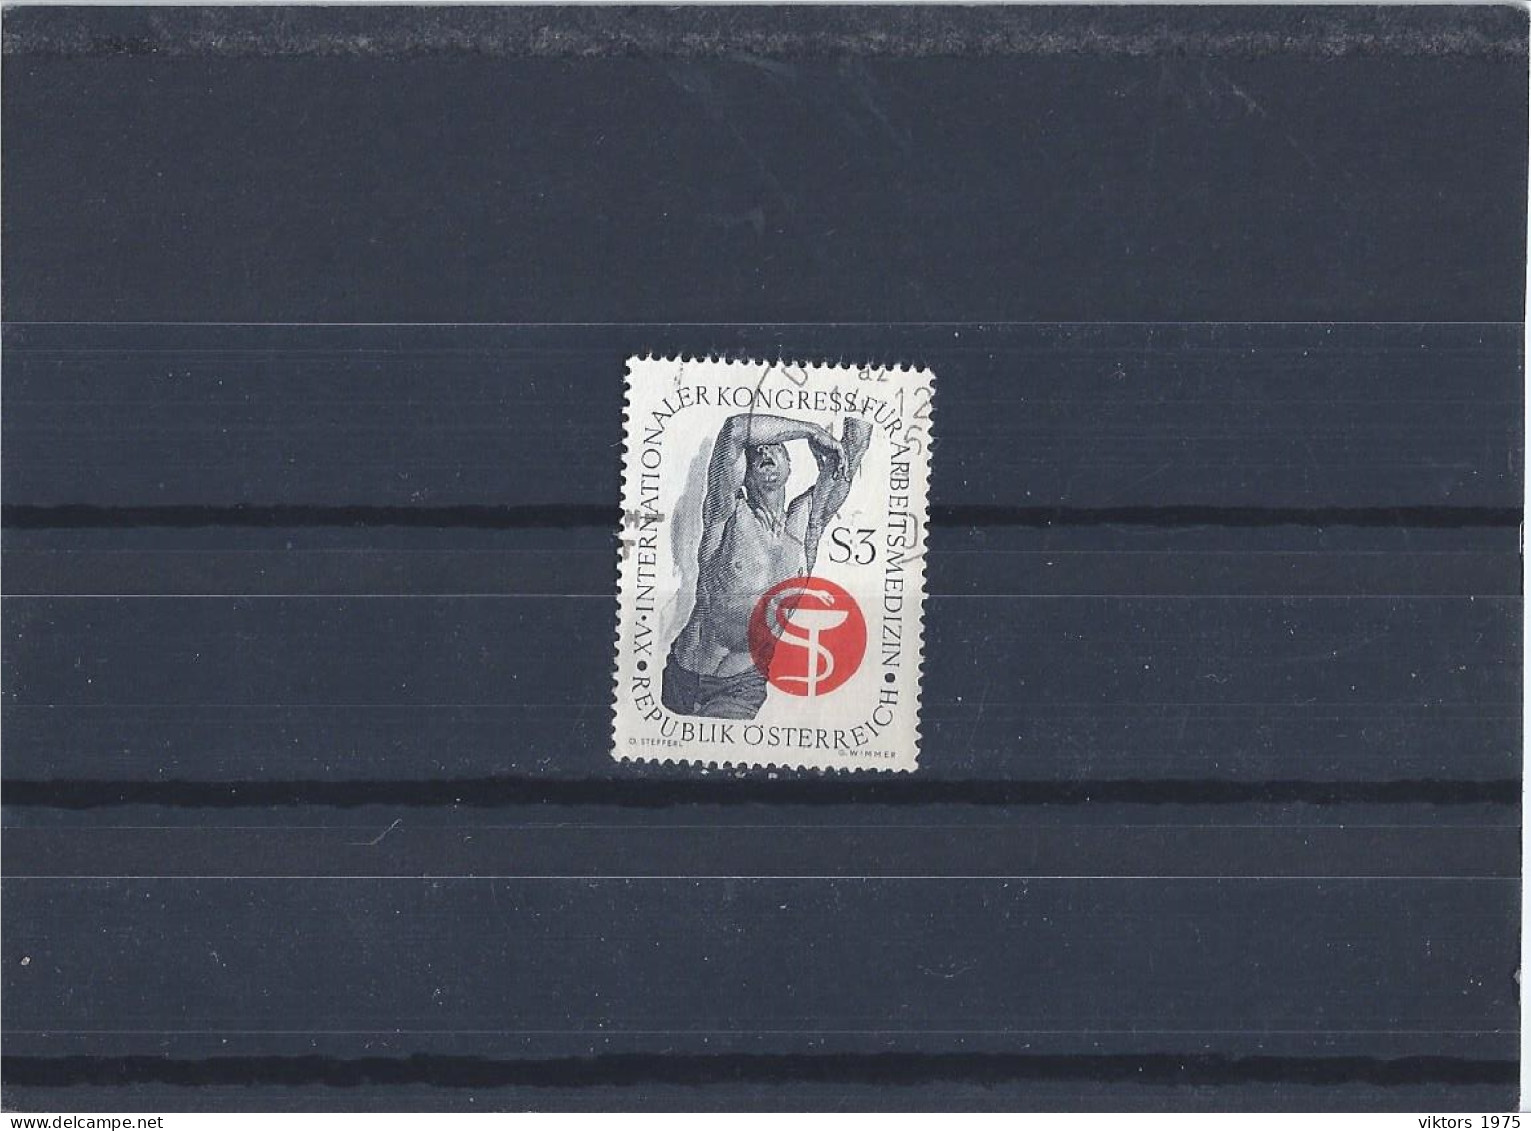 Used Stamp Nr.1217 In MICHEL Catalog - Used Stamps